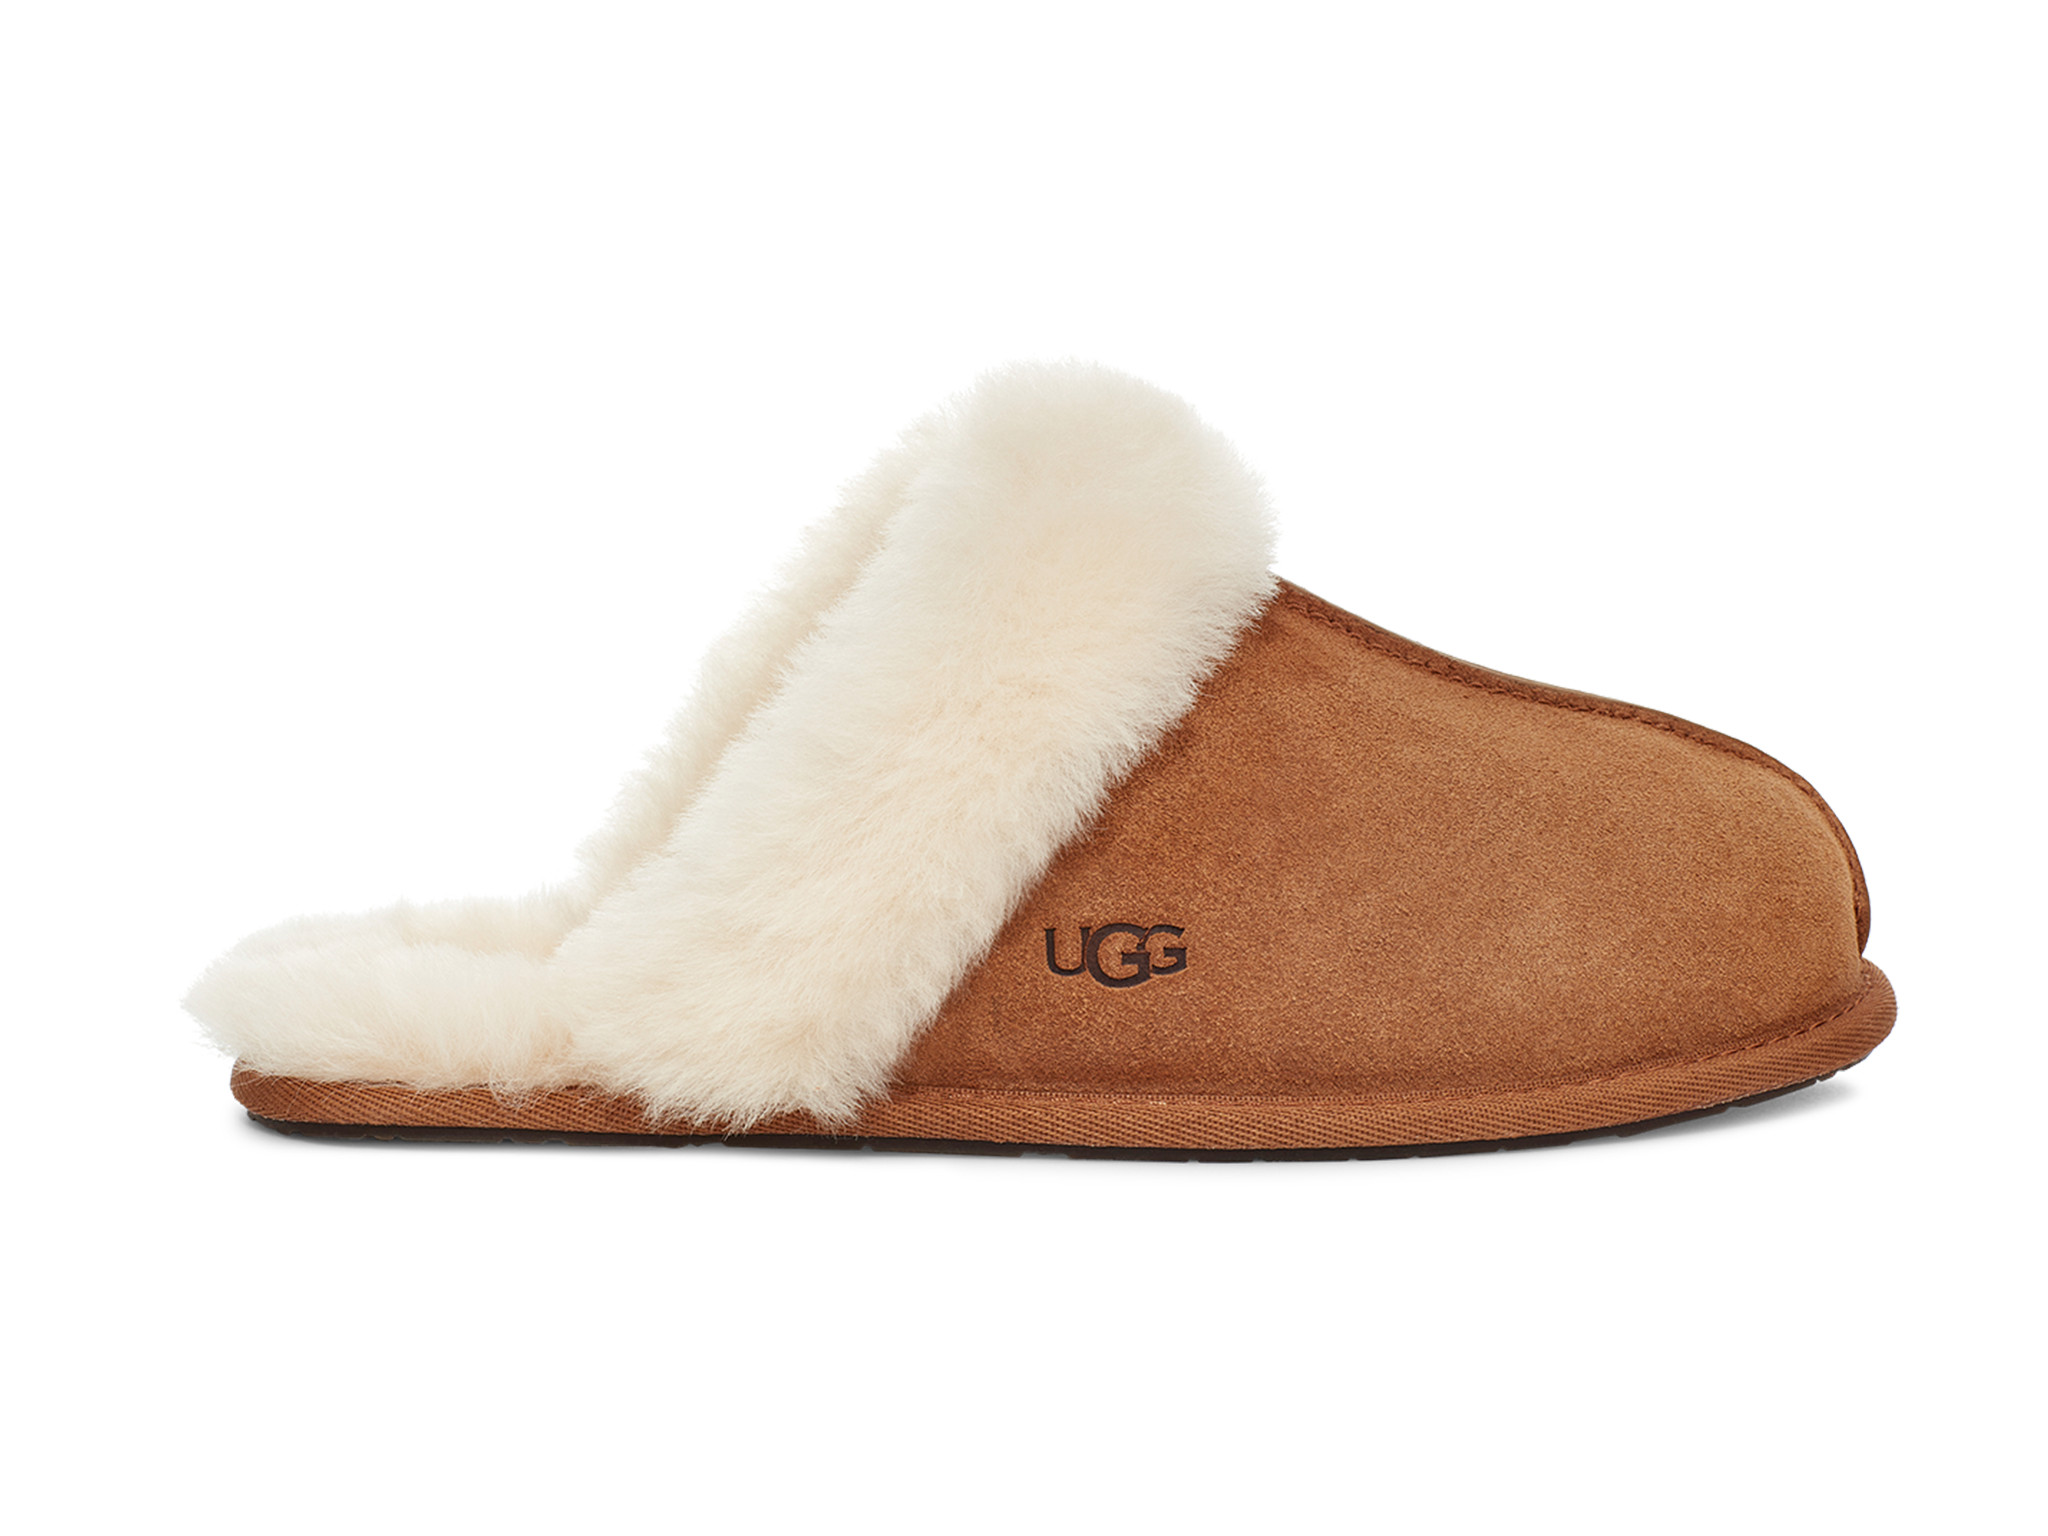 Ugg Scuffette sheepskin and suede slippers